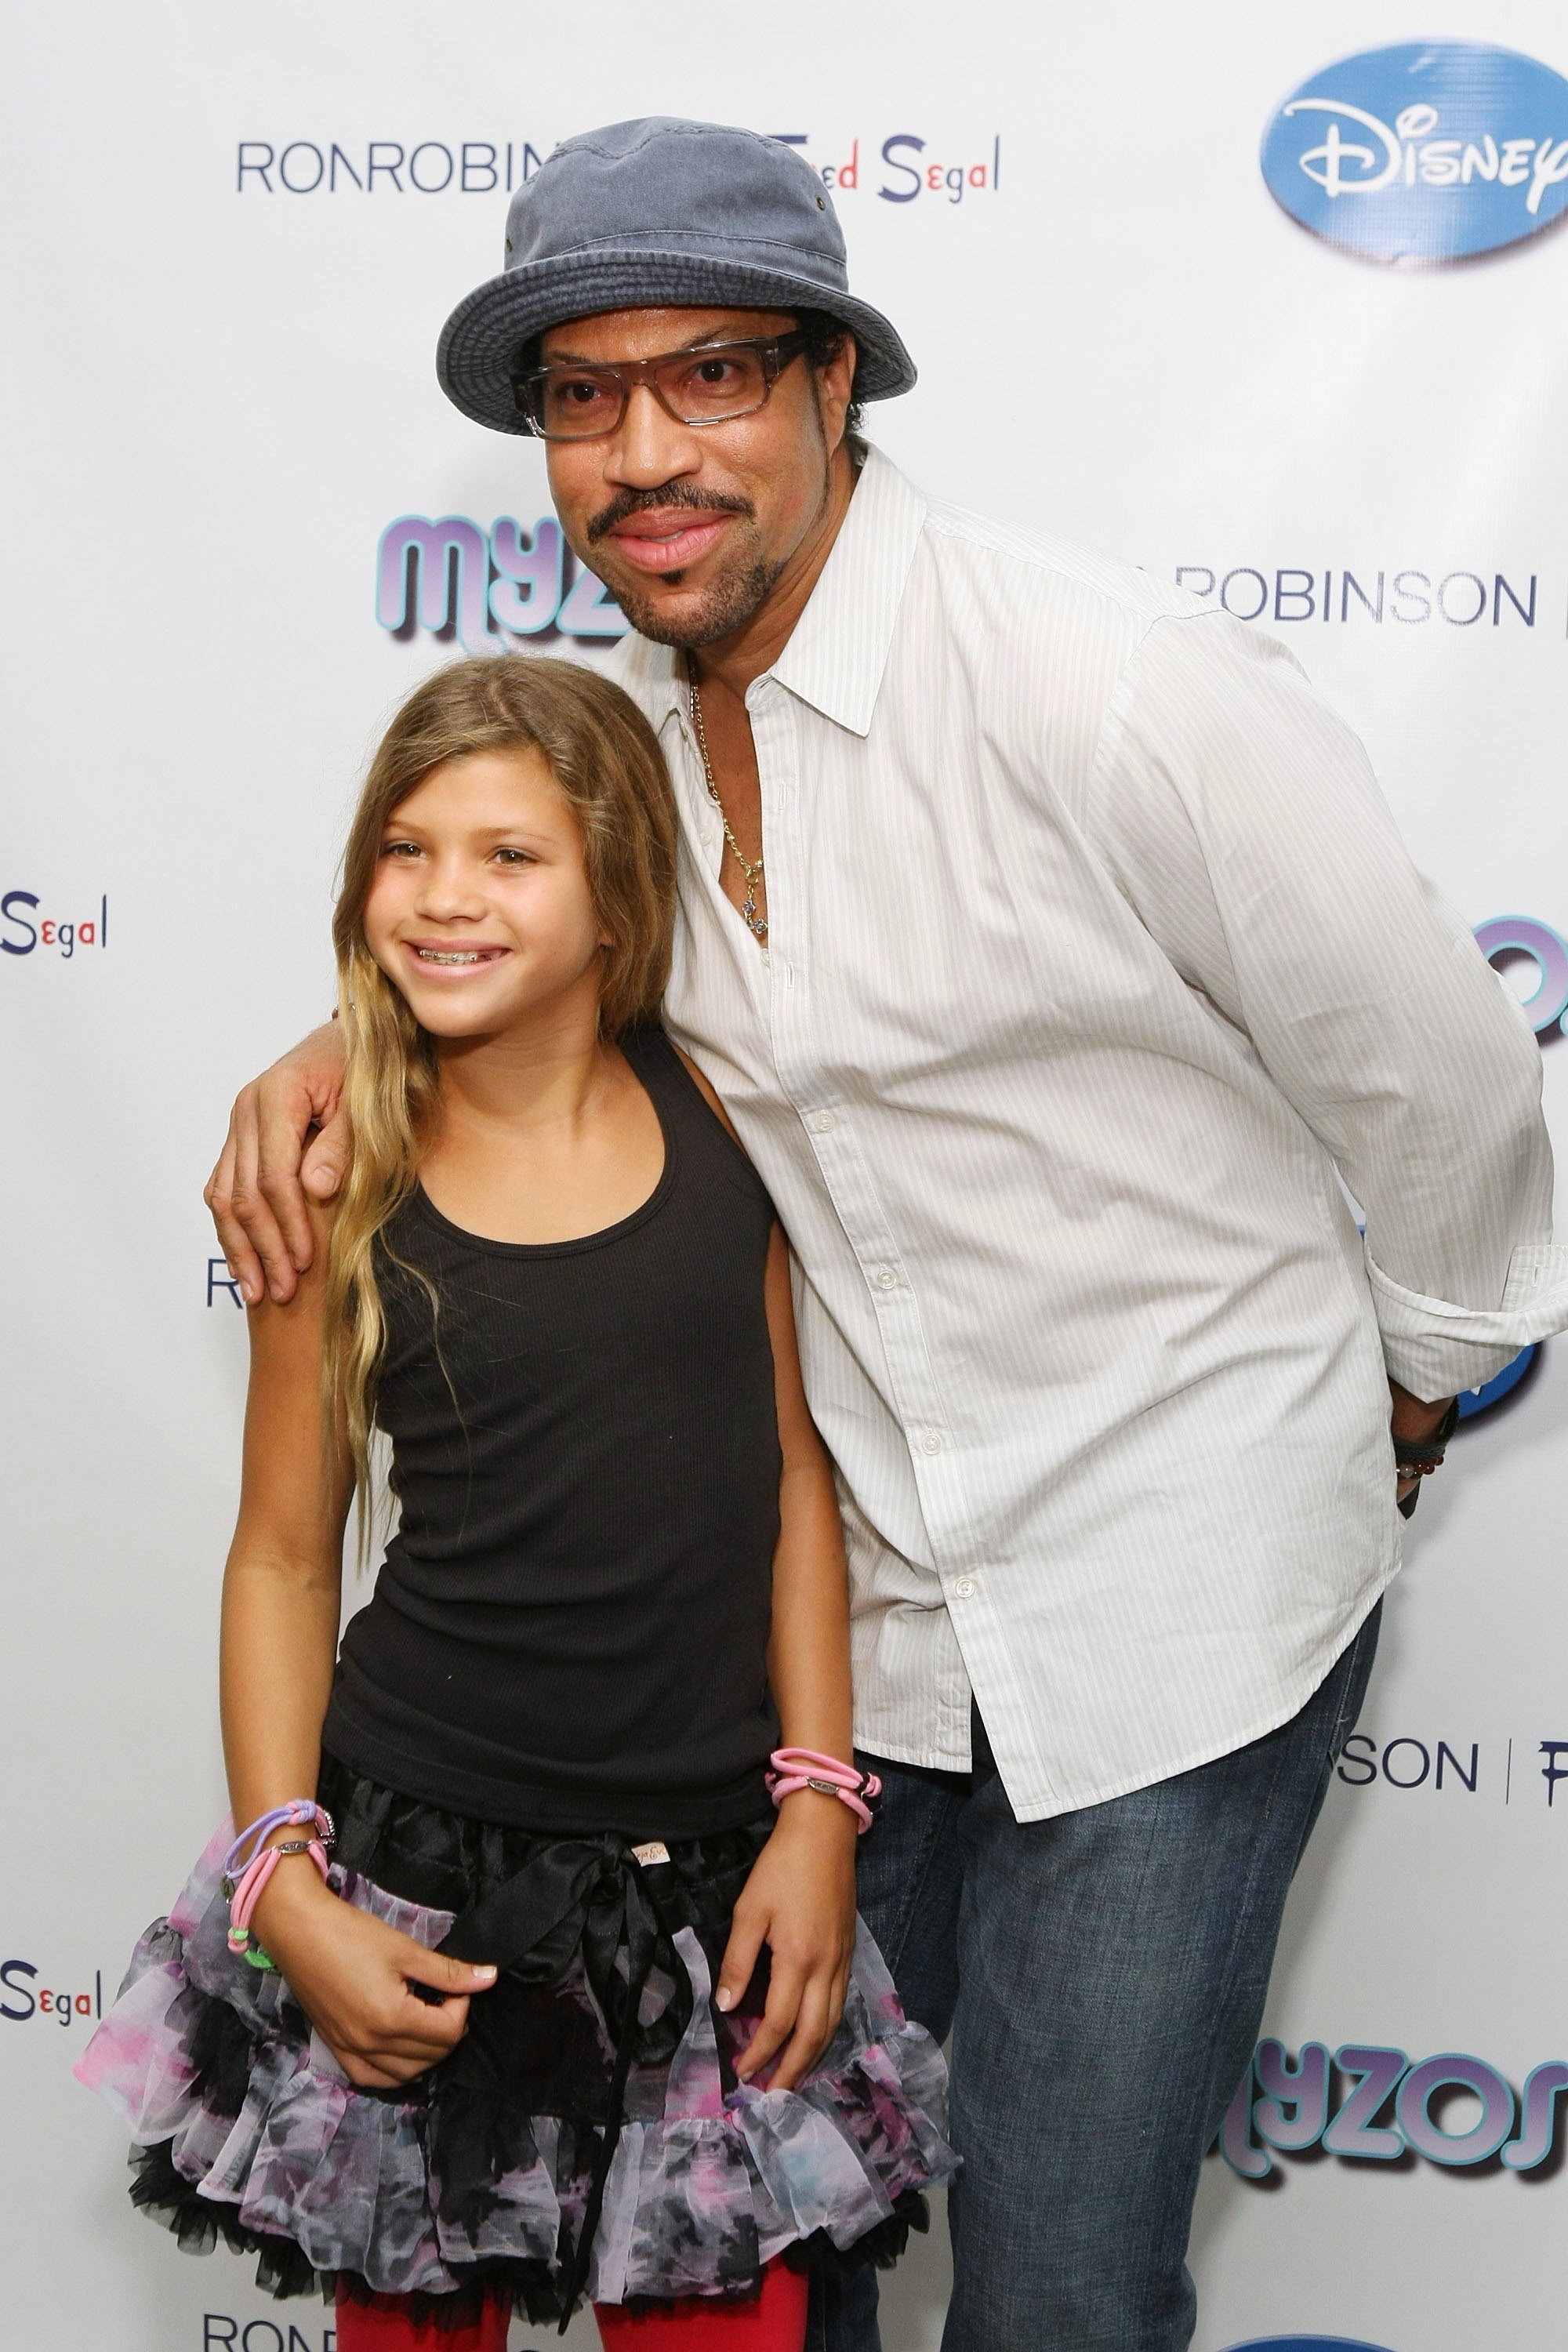 Throwback picture of Lionel Richie and his daughter Sofia Richie on August 22, 2009 in Santa Monica, California. | Source: Kristian Dowling/Getty Images